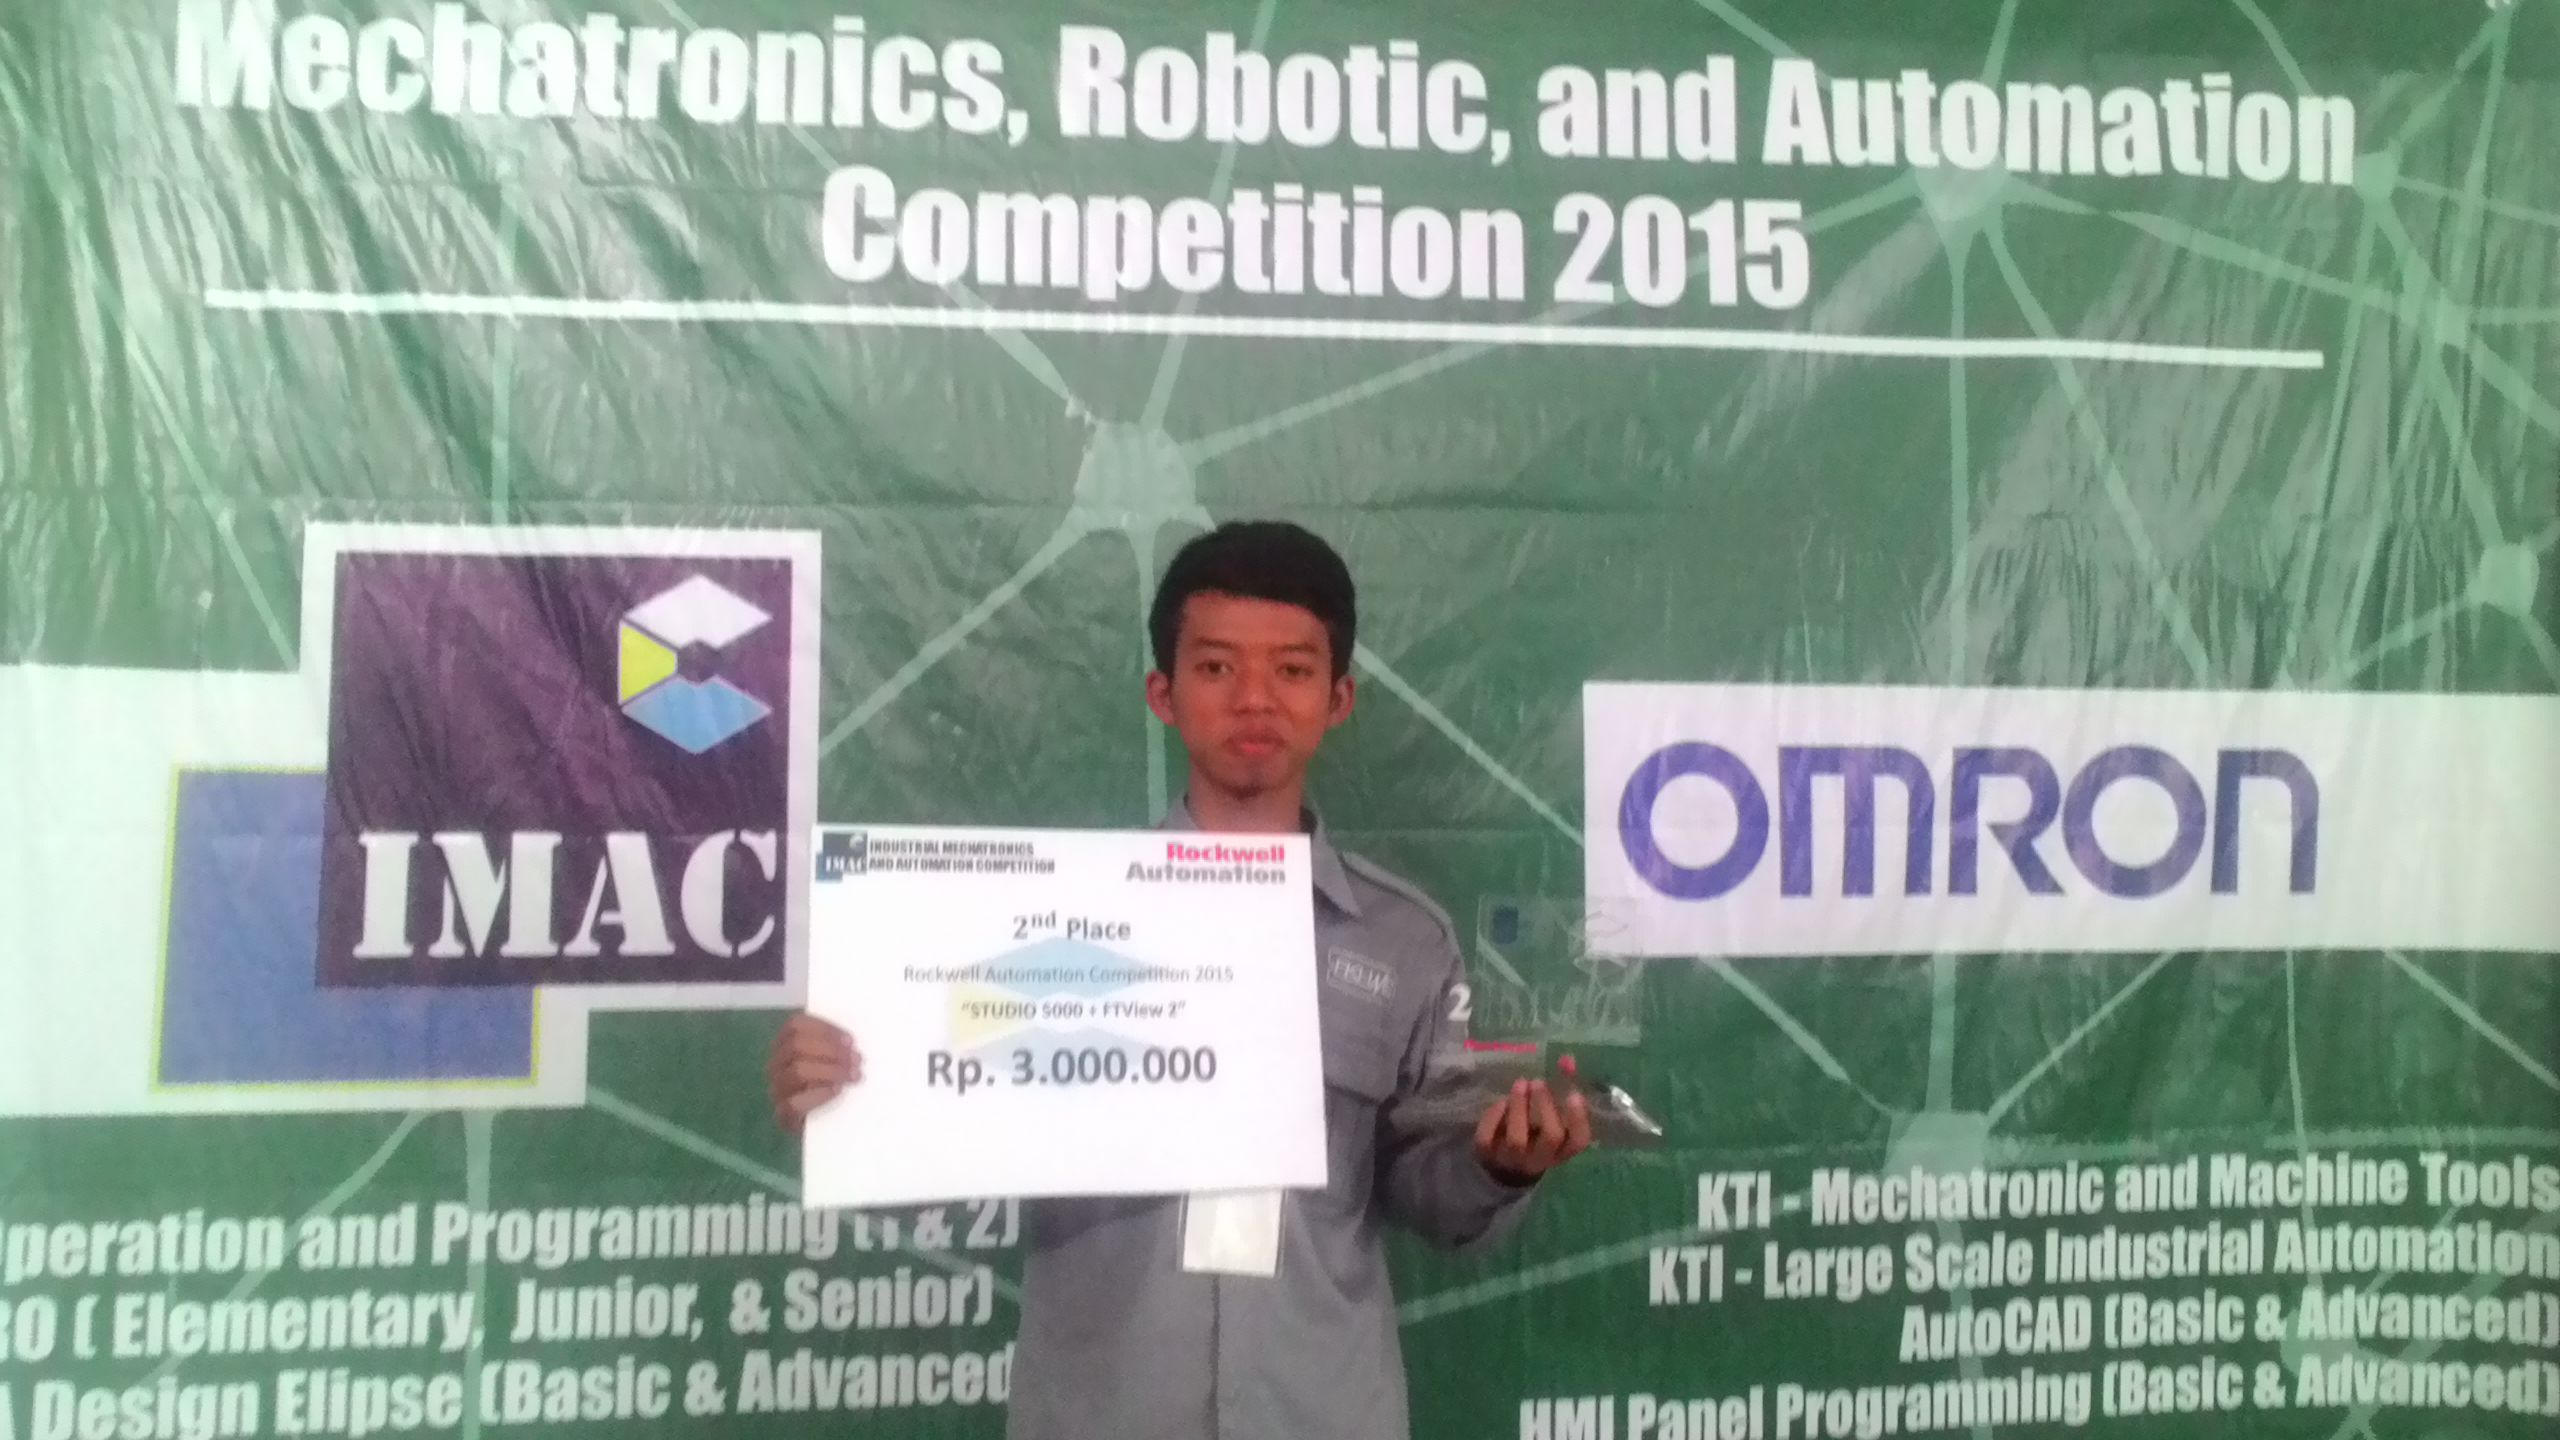 Foto Studio 500 + FTView Competition 2, Rockwell Automation Competition, Industrial and Mechatronic Competition 2015